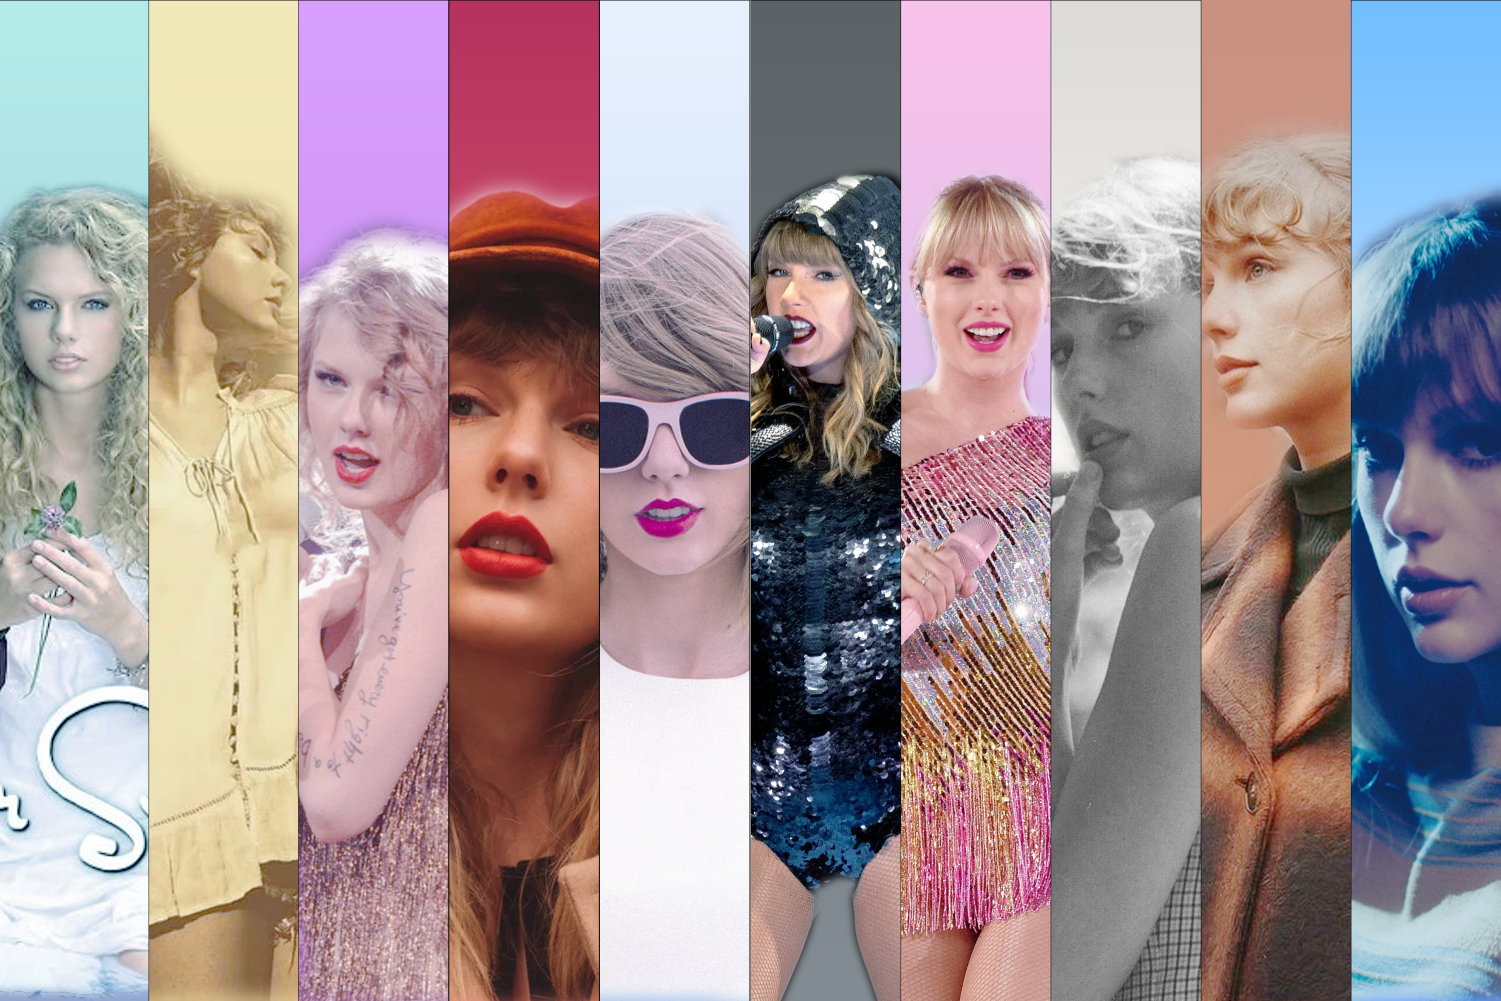 10+photos+of+Taylor+Swift+in+a+rainbow+of+outfits+and+colors+to+represent+her+different+%E2%80%9Ceras%E2%80%9D